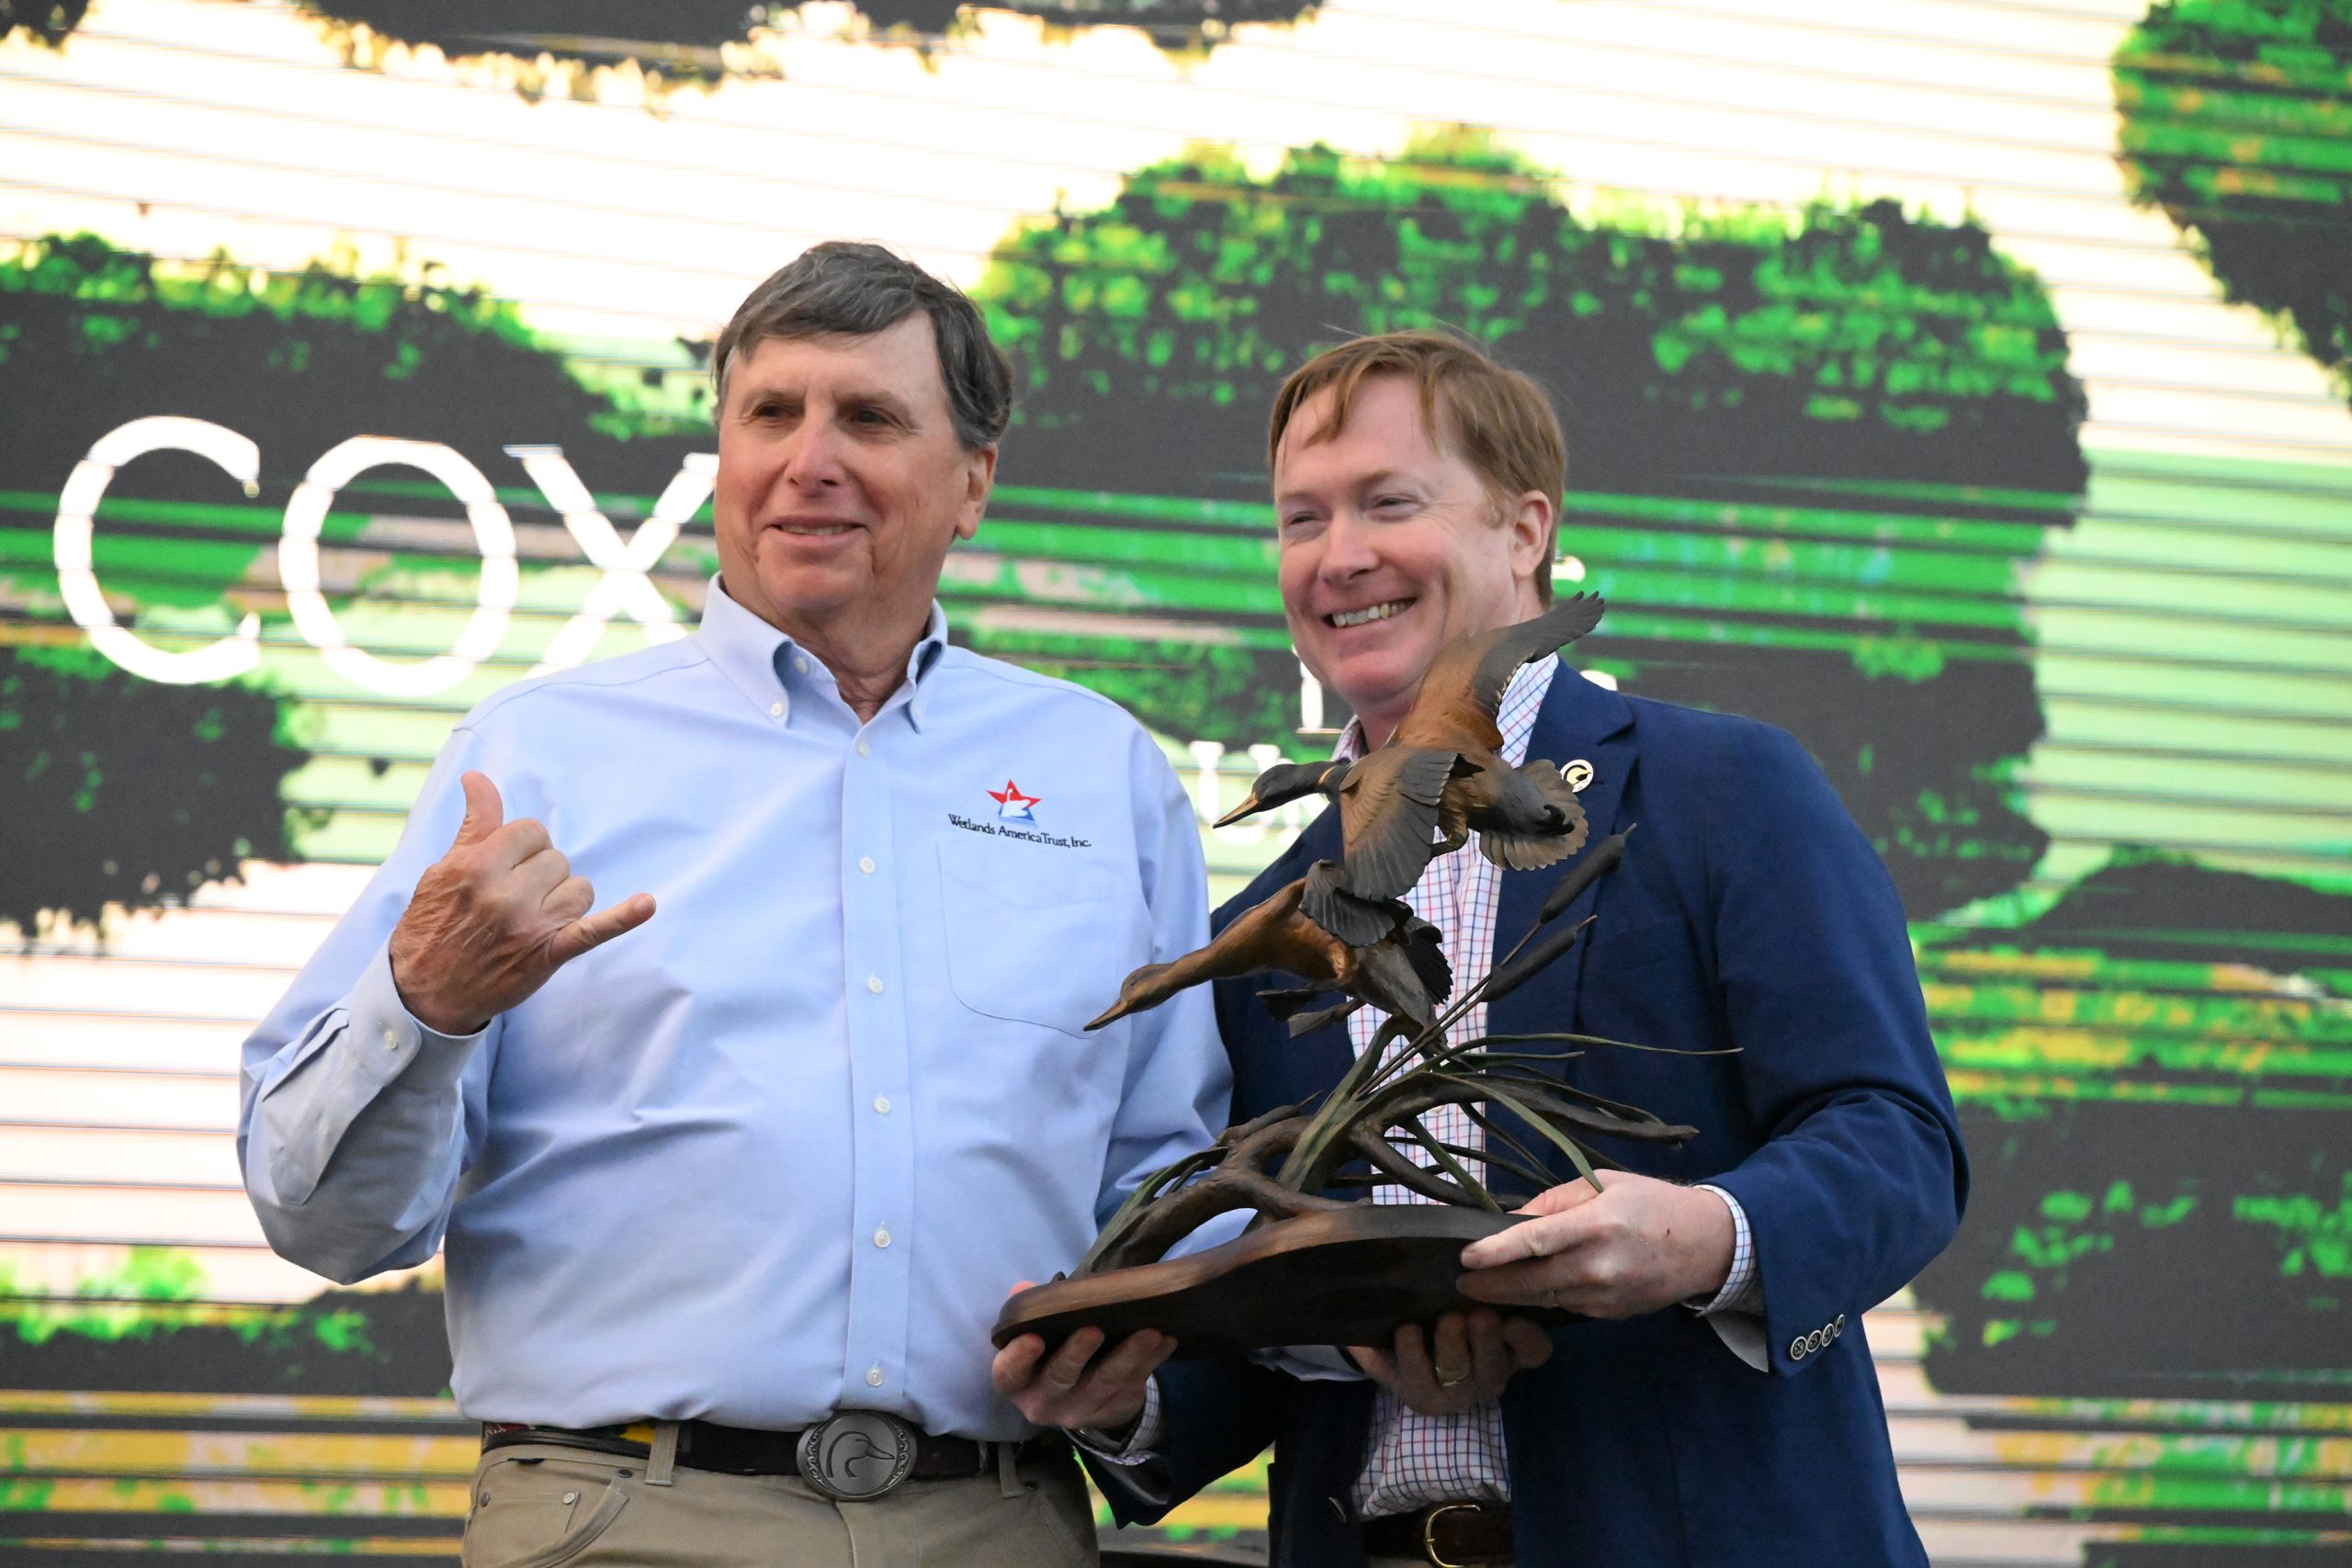 Jim Kennedy, left, and Adam Putnam at the announcement. (Courtesy photo.)